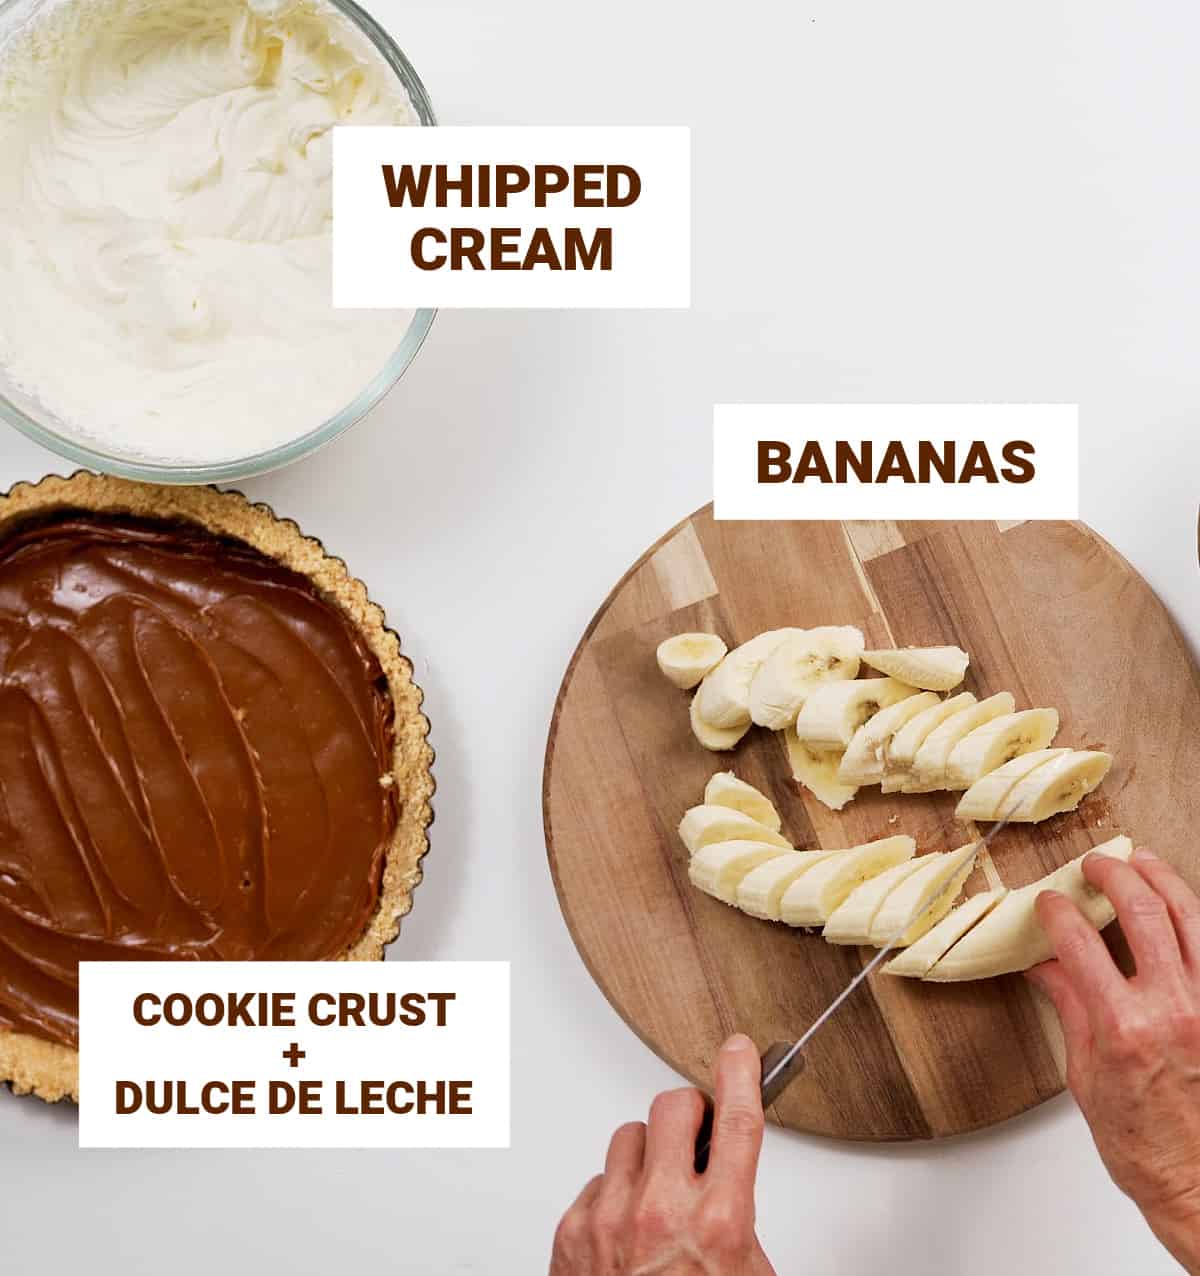 Top view of hands slicing bananas on wooden board, pie with dulce de leche, whipped cream in bowl; text overlays.